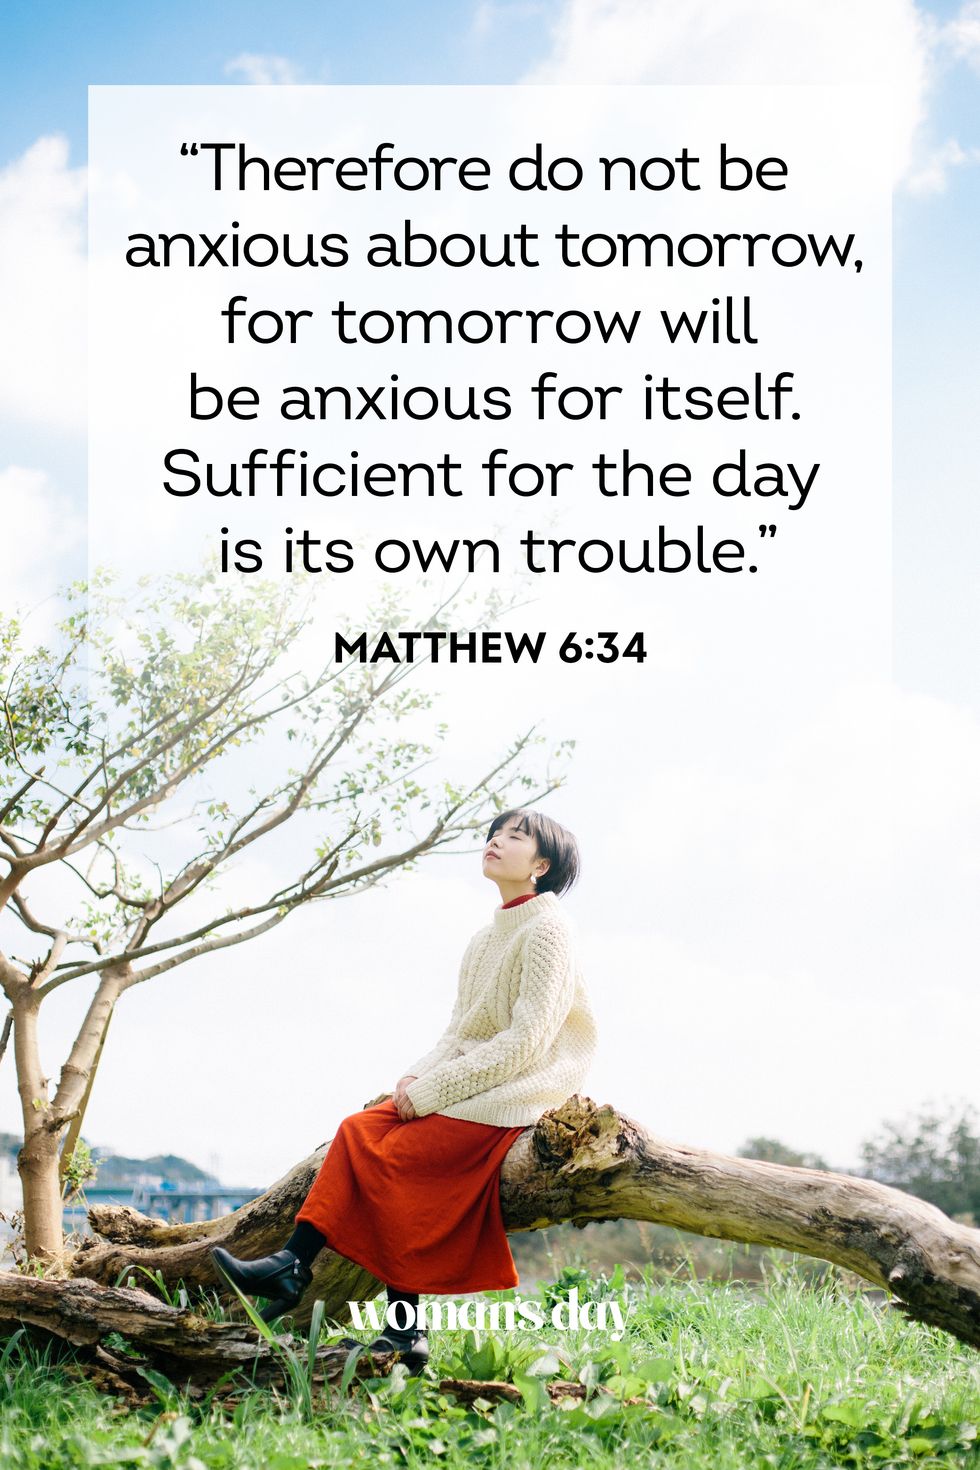 What does it mean that sufficient for the day is its own trouble